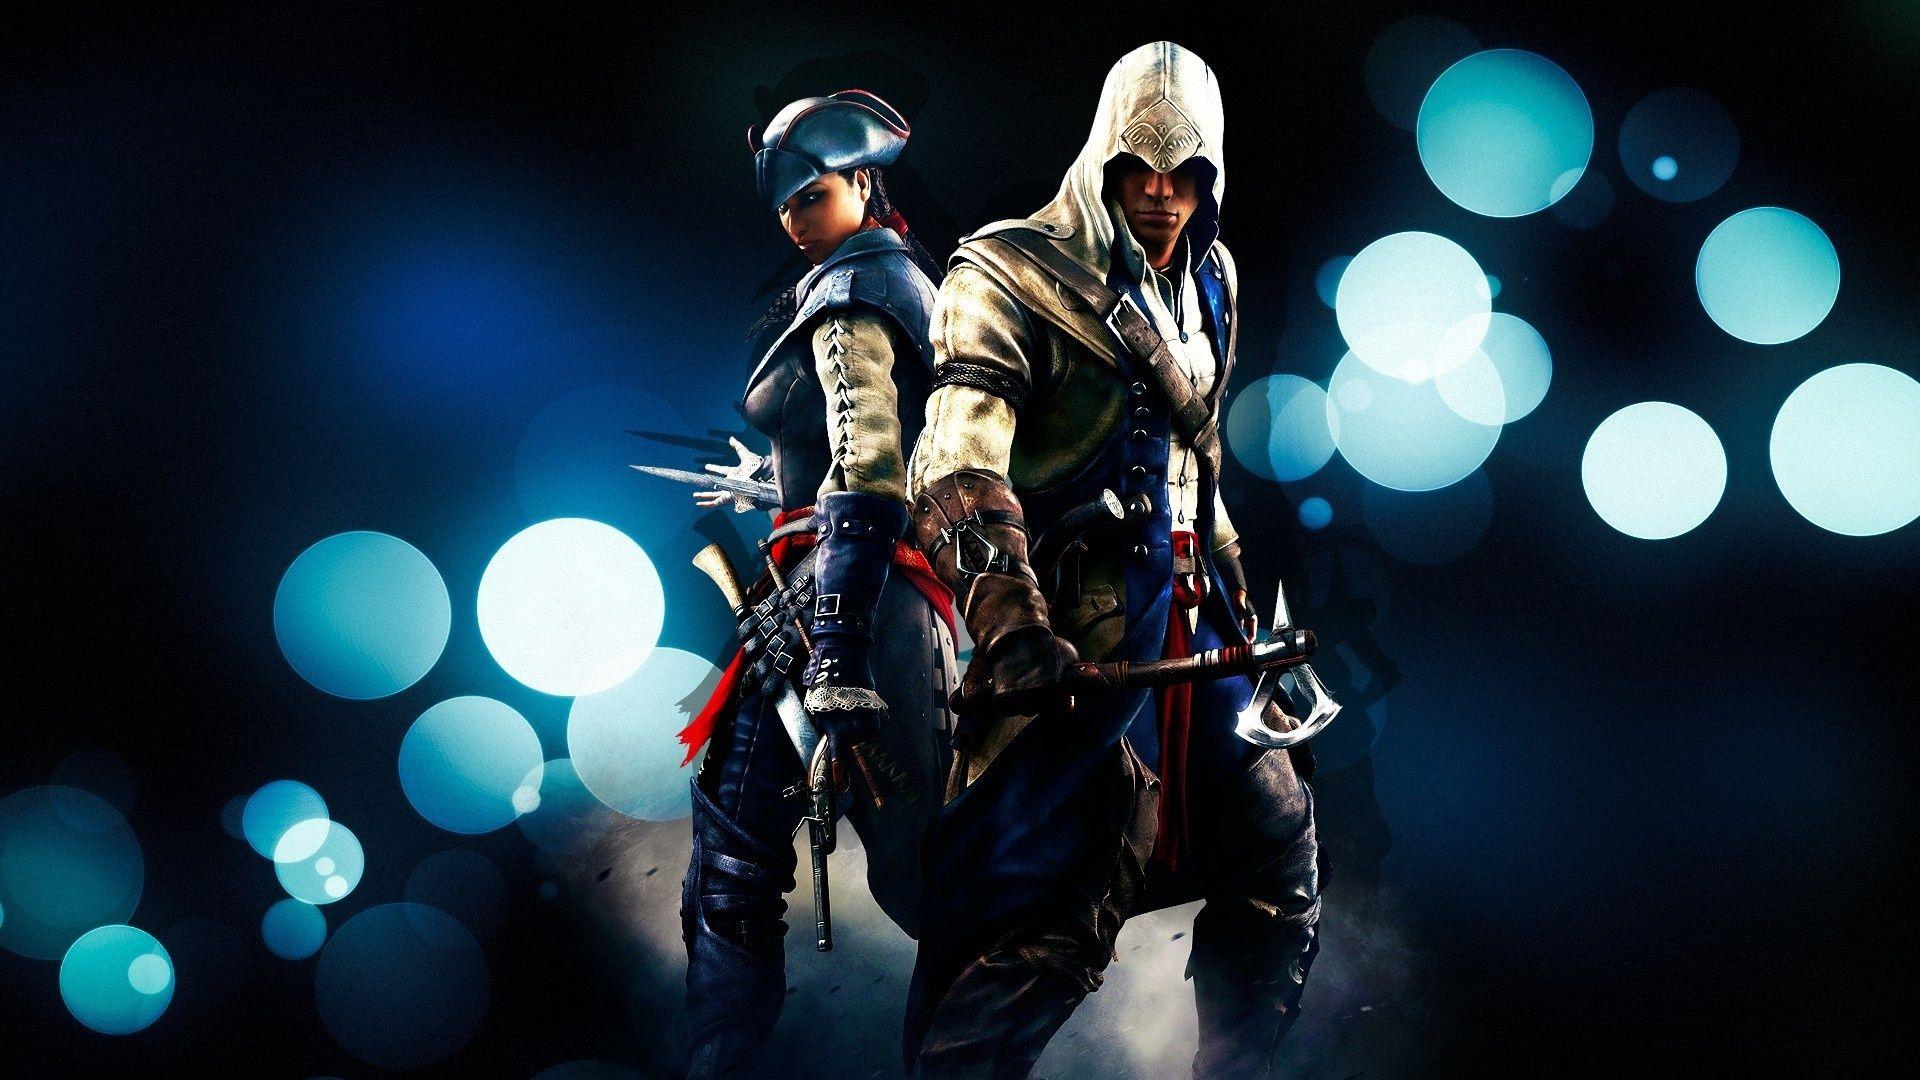 Assassin's Creed III Wallpaper, Picture, Image